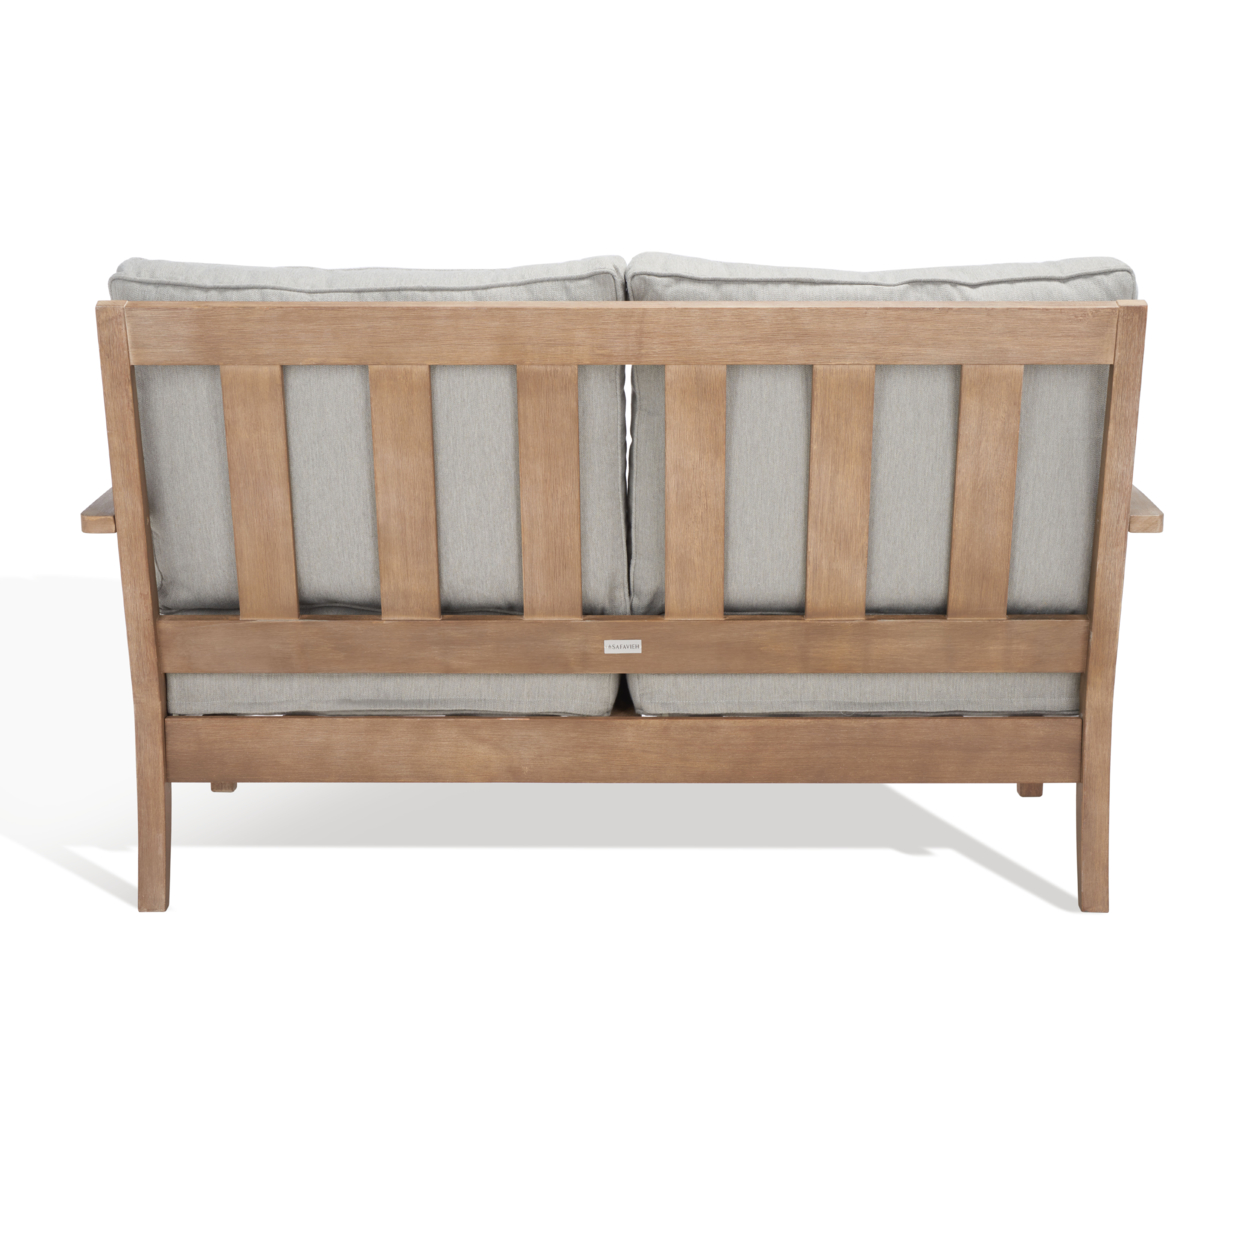 SAFAVIEH OUTDOOR COUTURE Martinique Wood Patio Loveseat Natural / Grey